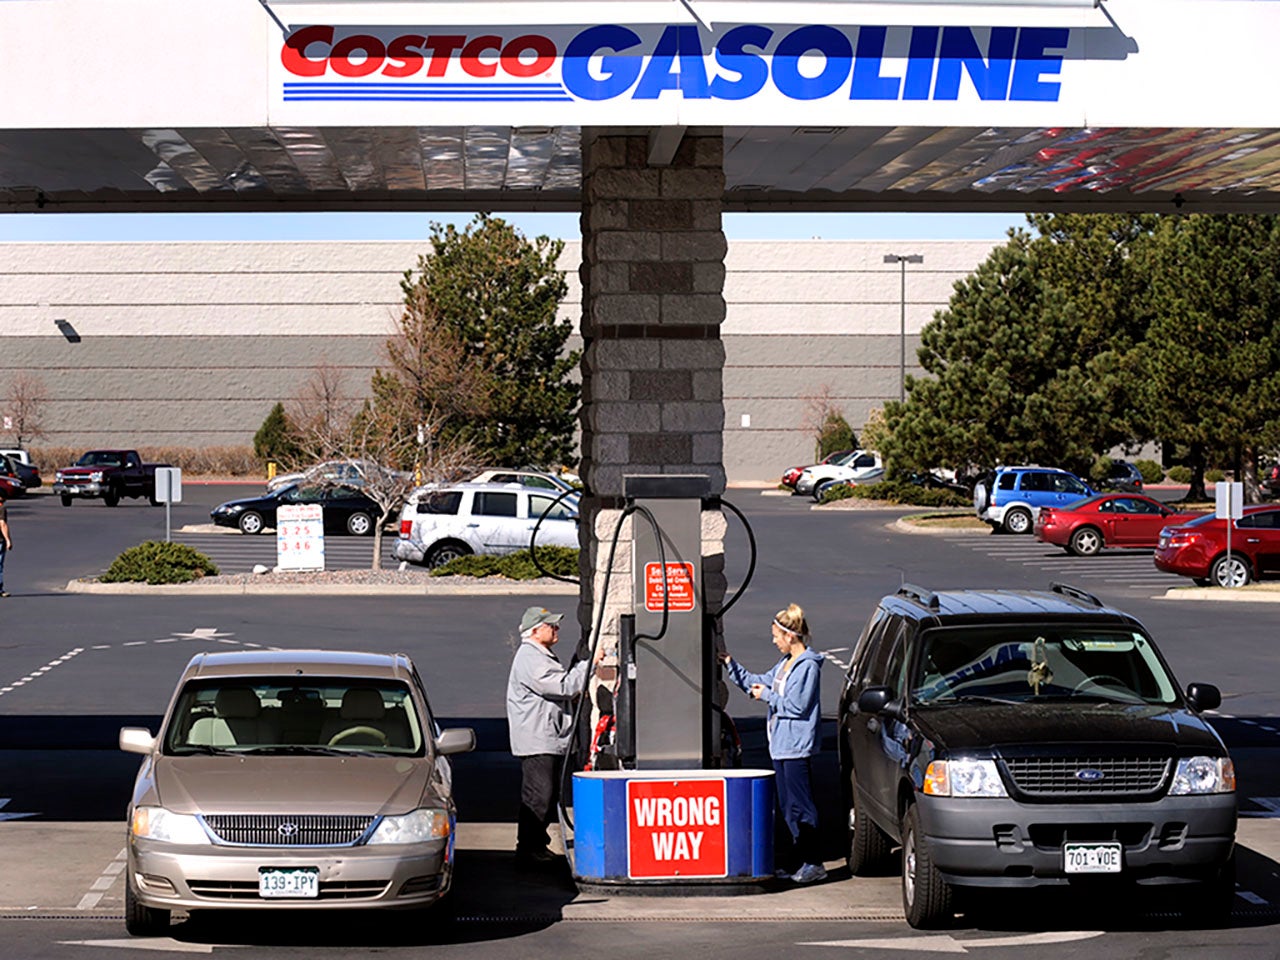 with-costco-visa-card-which-gas-stations-earn-4-cash-back